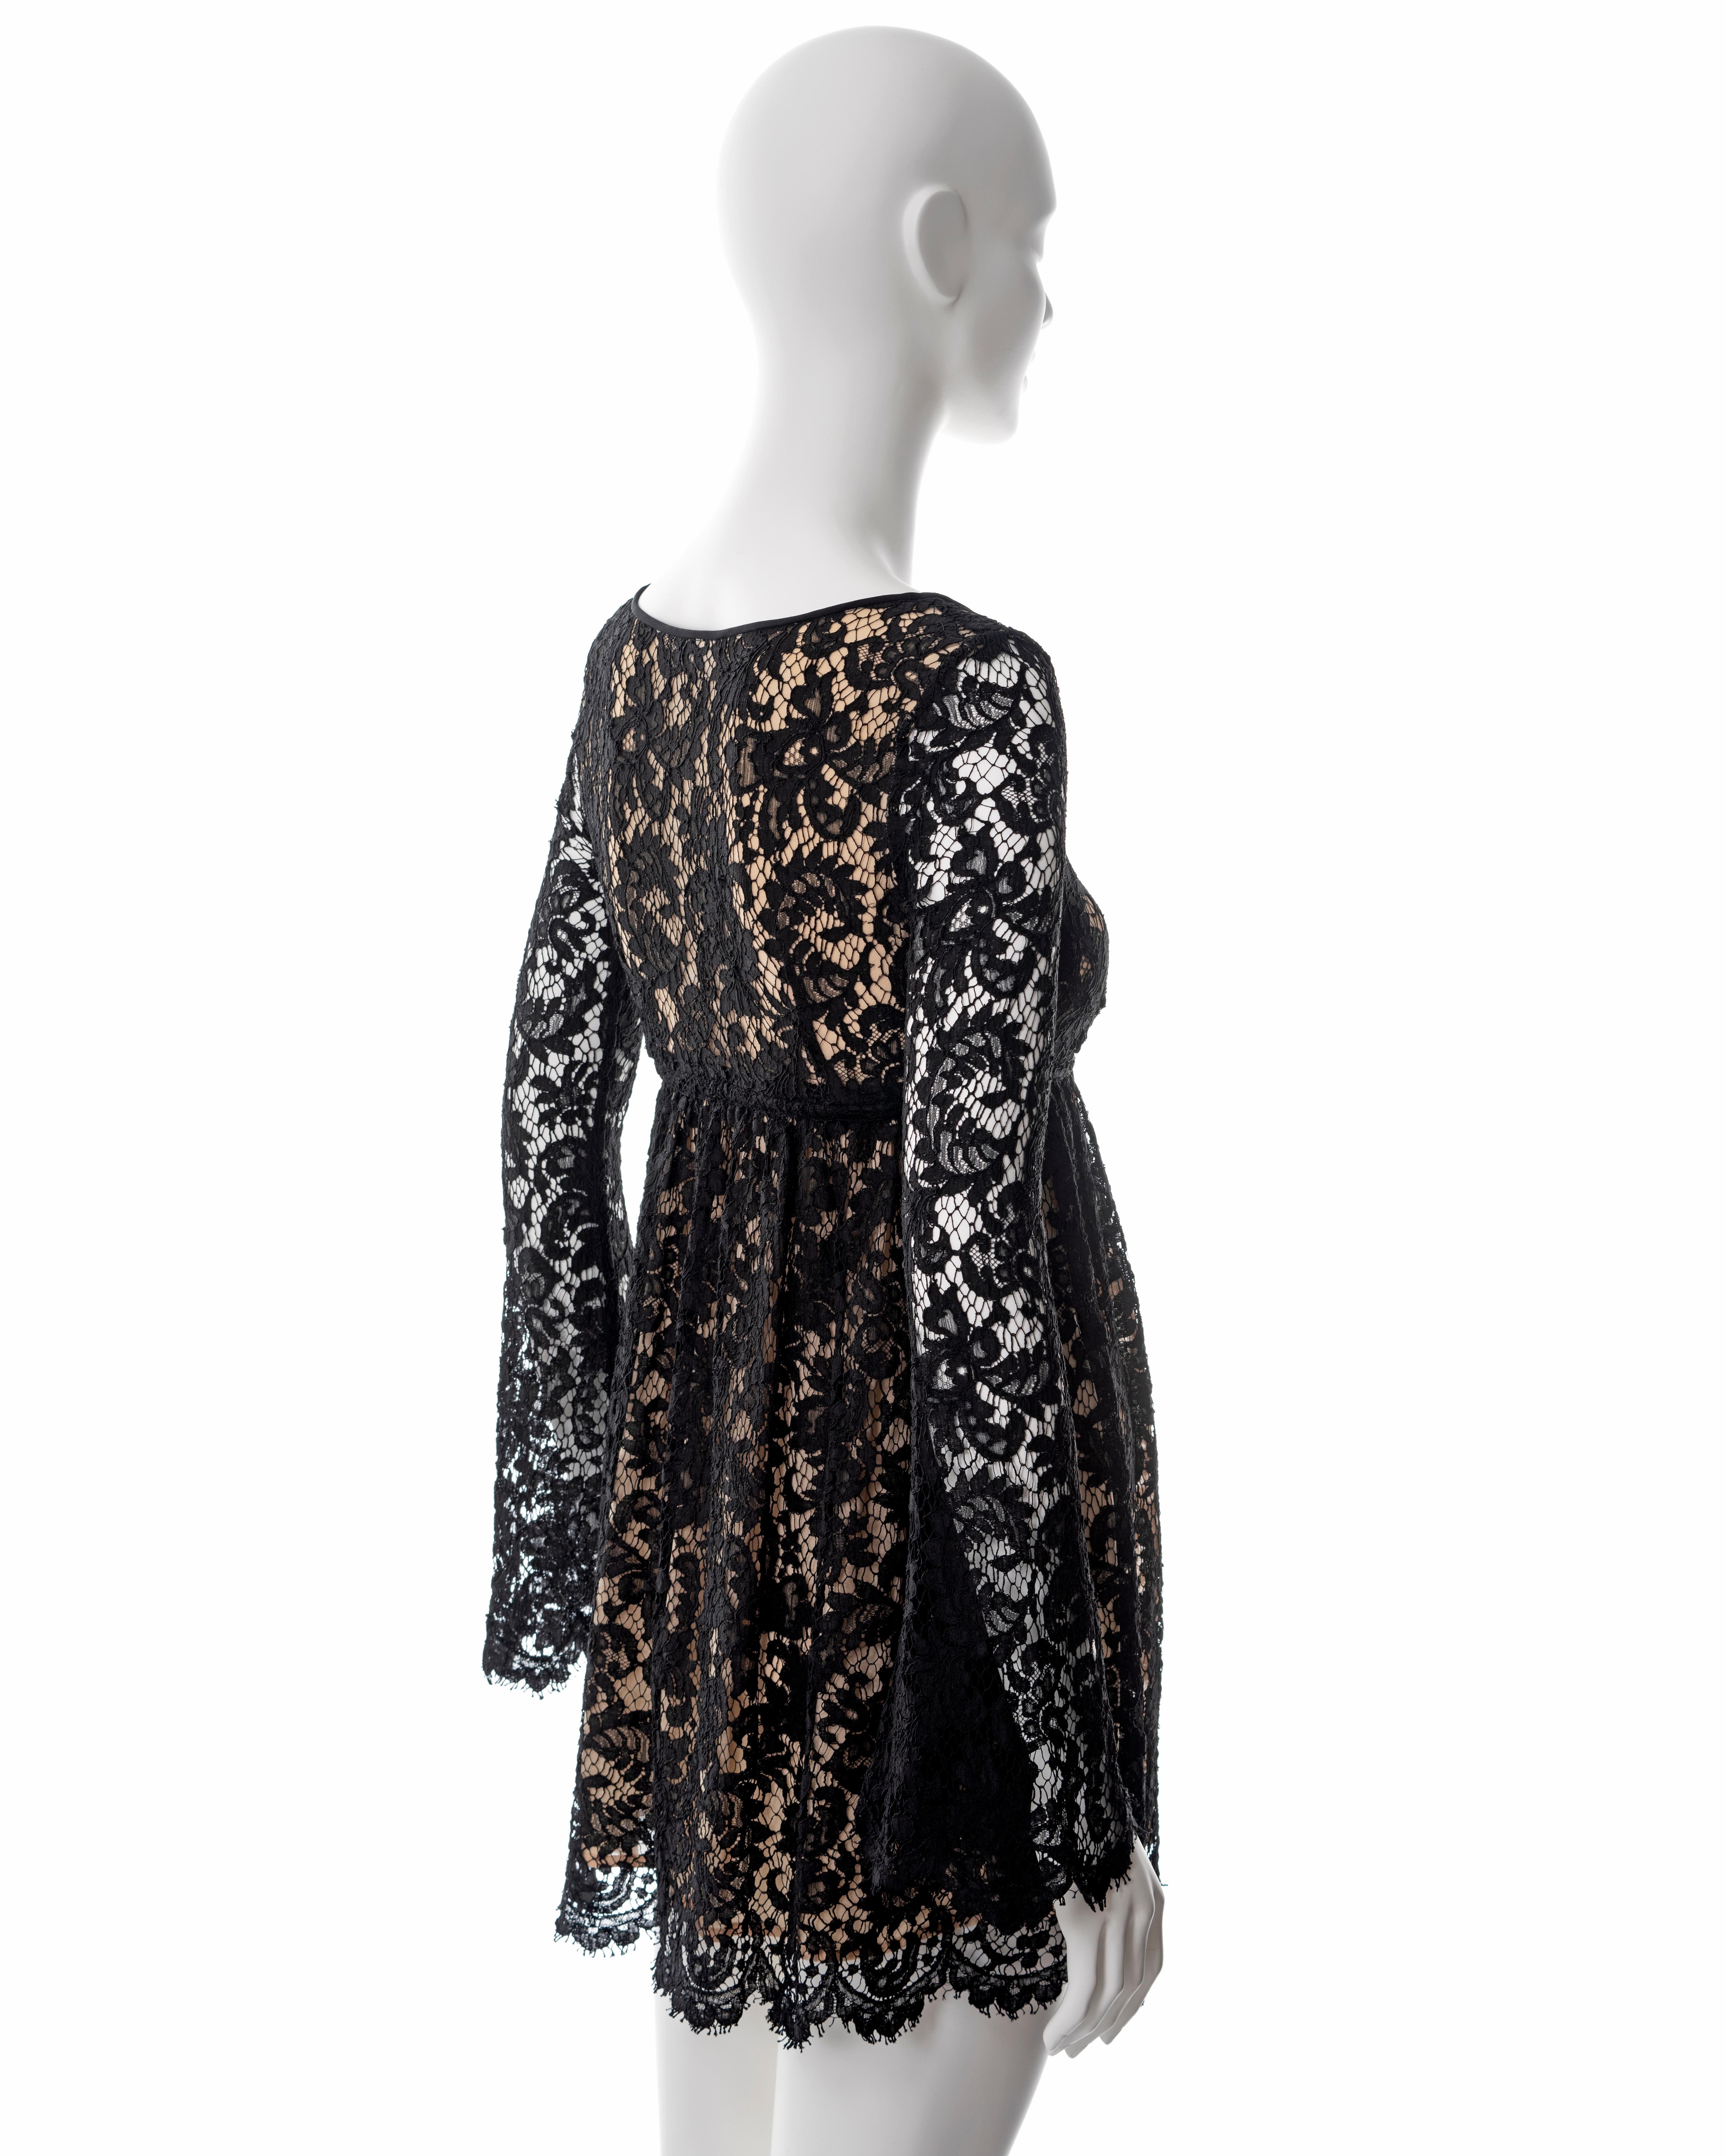 Gucci by Tom Ford black lace long sleeve mini dress, ss 1996 For Sale 3